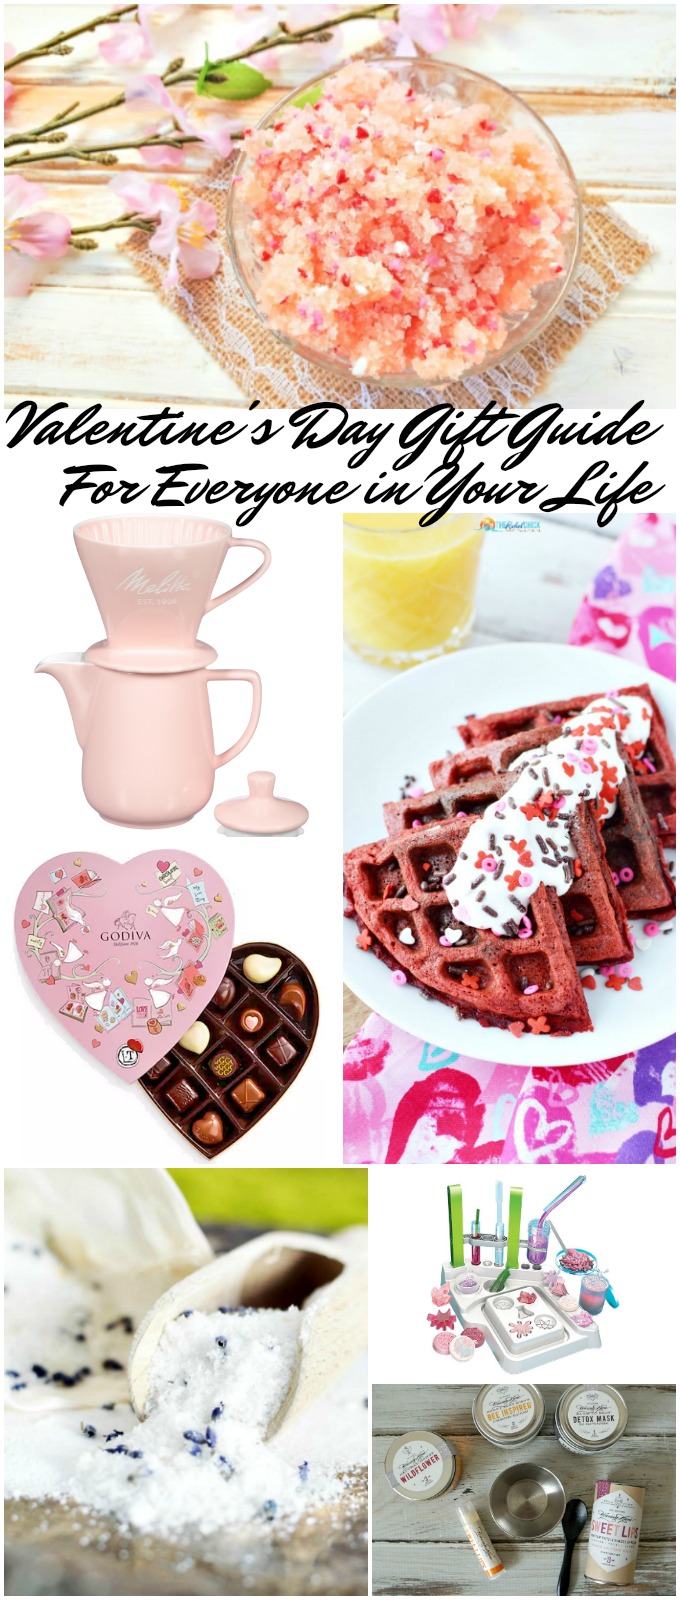 Valentine's Day Gift Guide For Everyone in Your Life